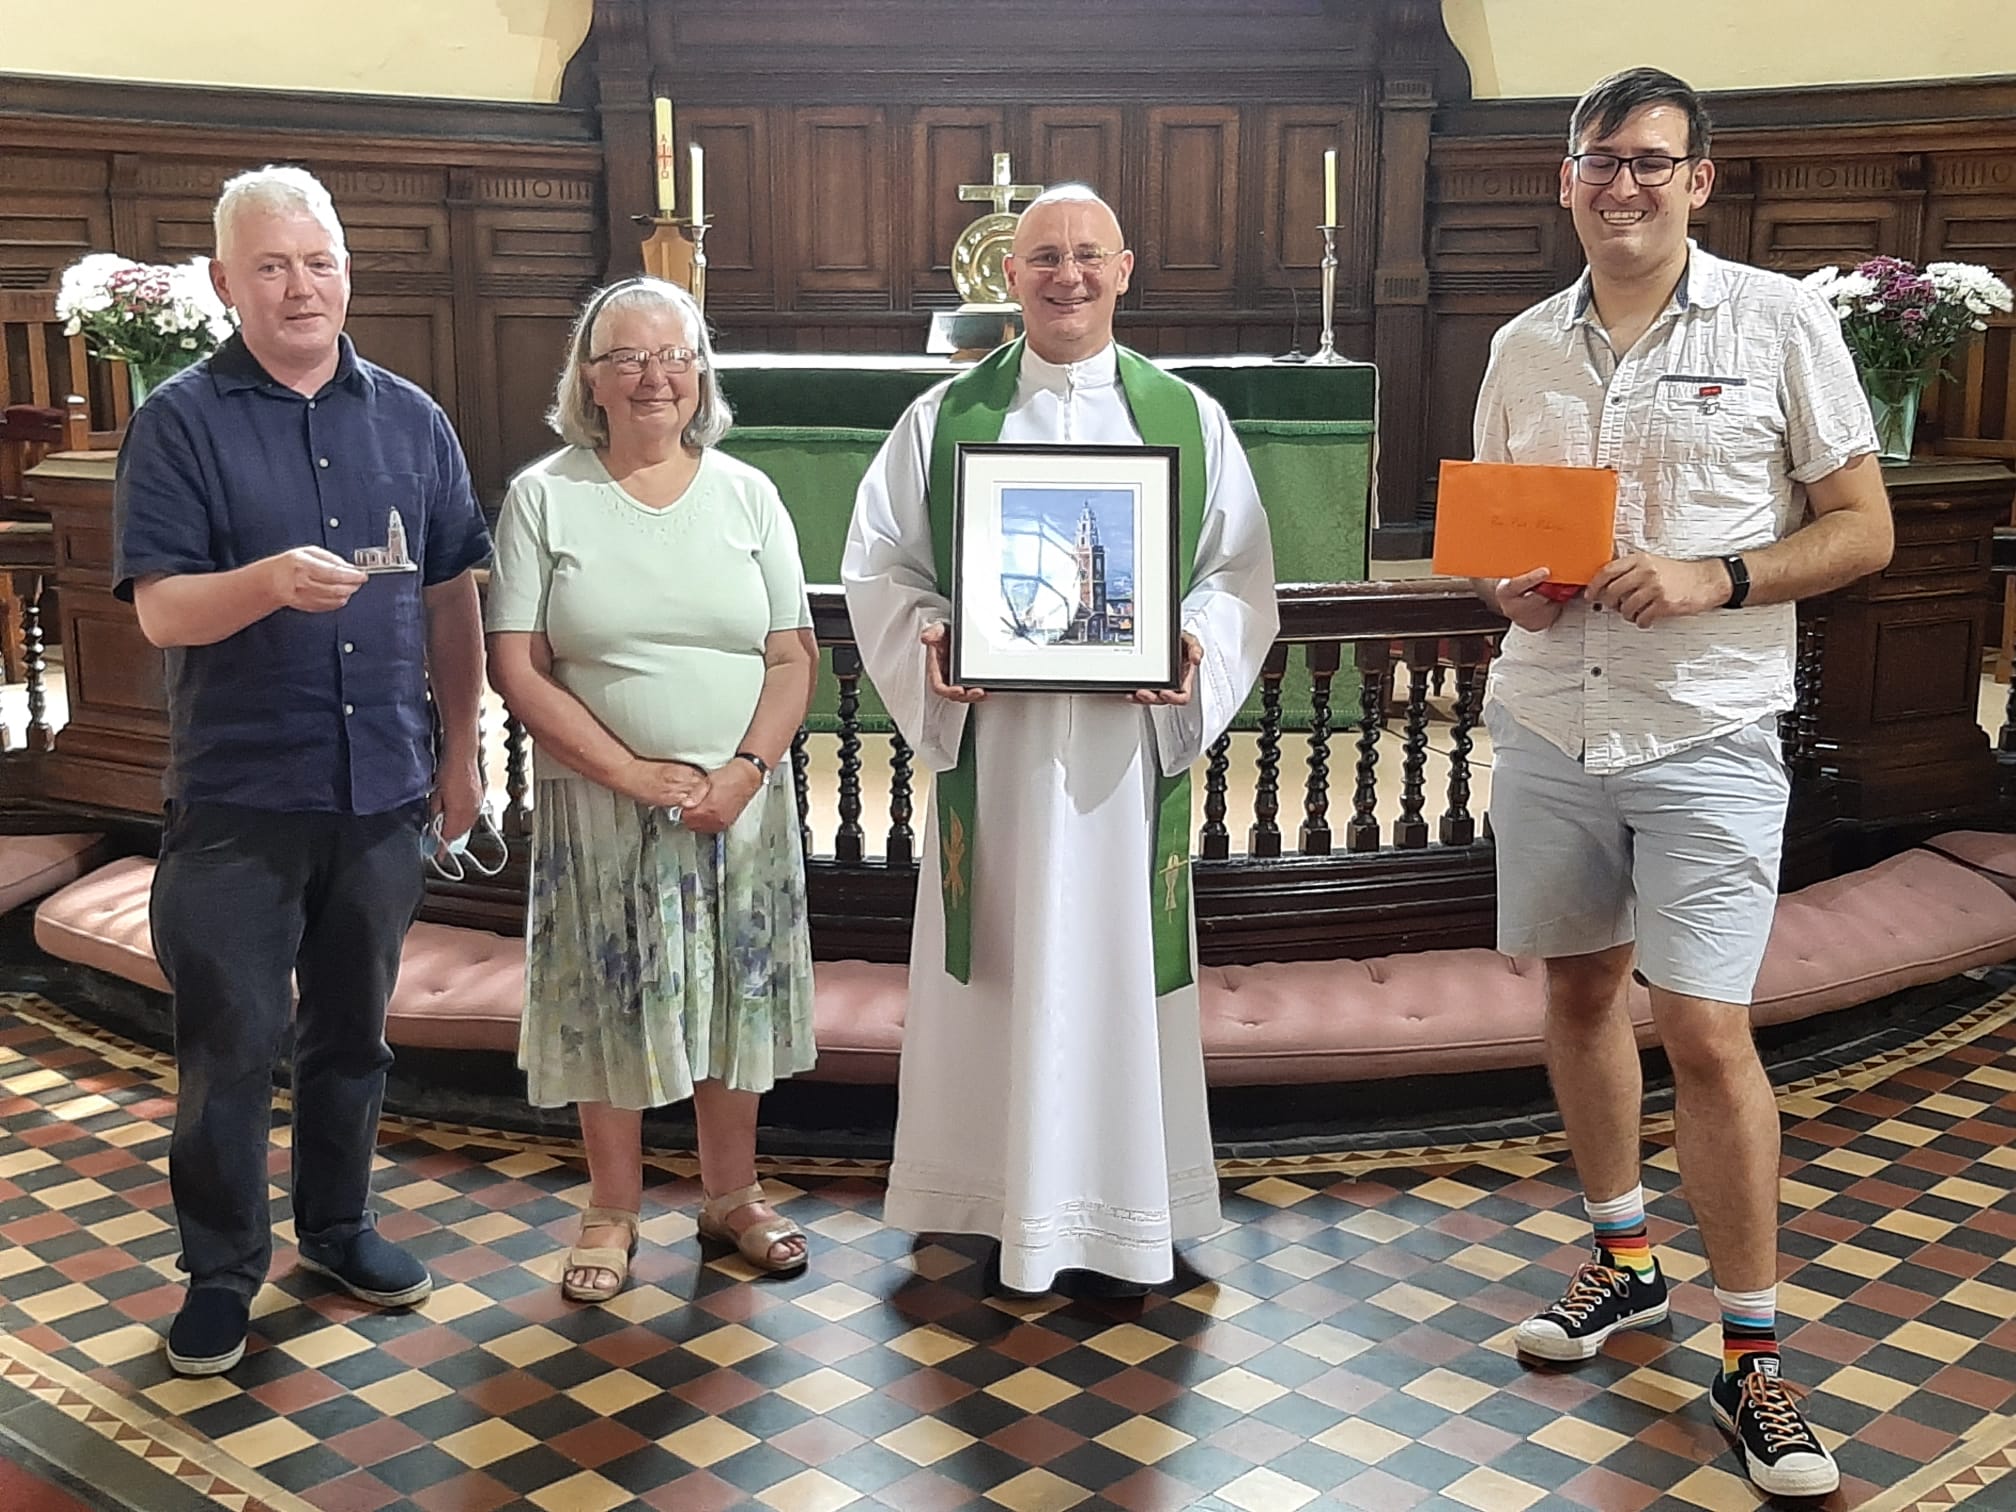 The churchwardens of St Anne's, Shandon, made a presentation to the Rev Paul Robinson on behalf of the parish.